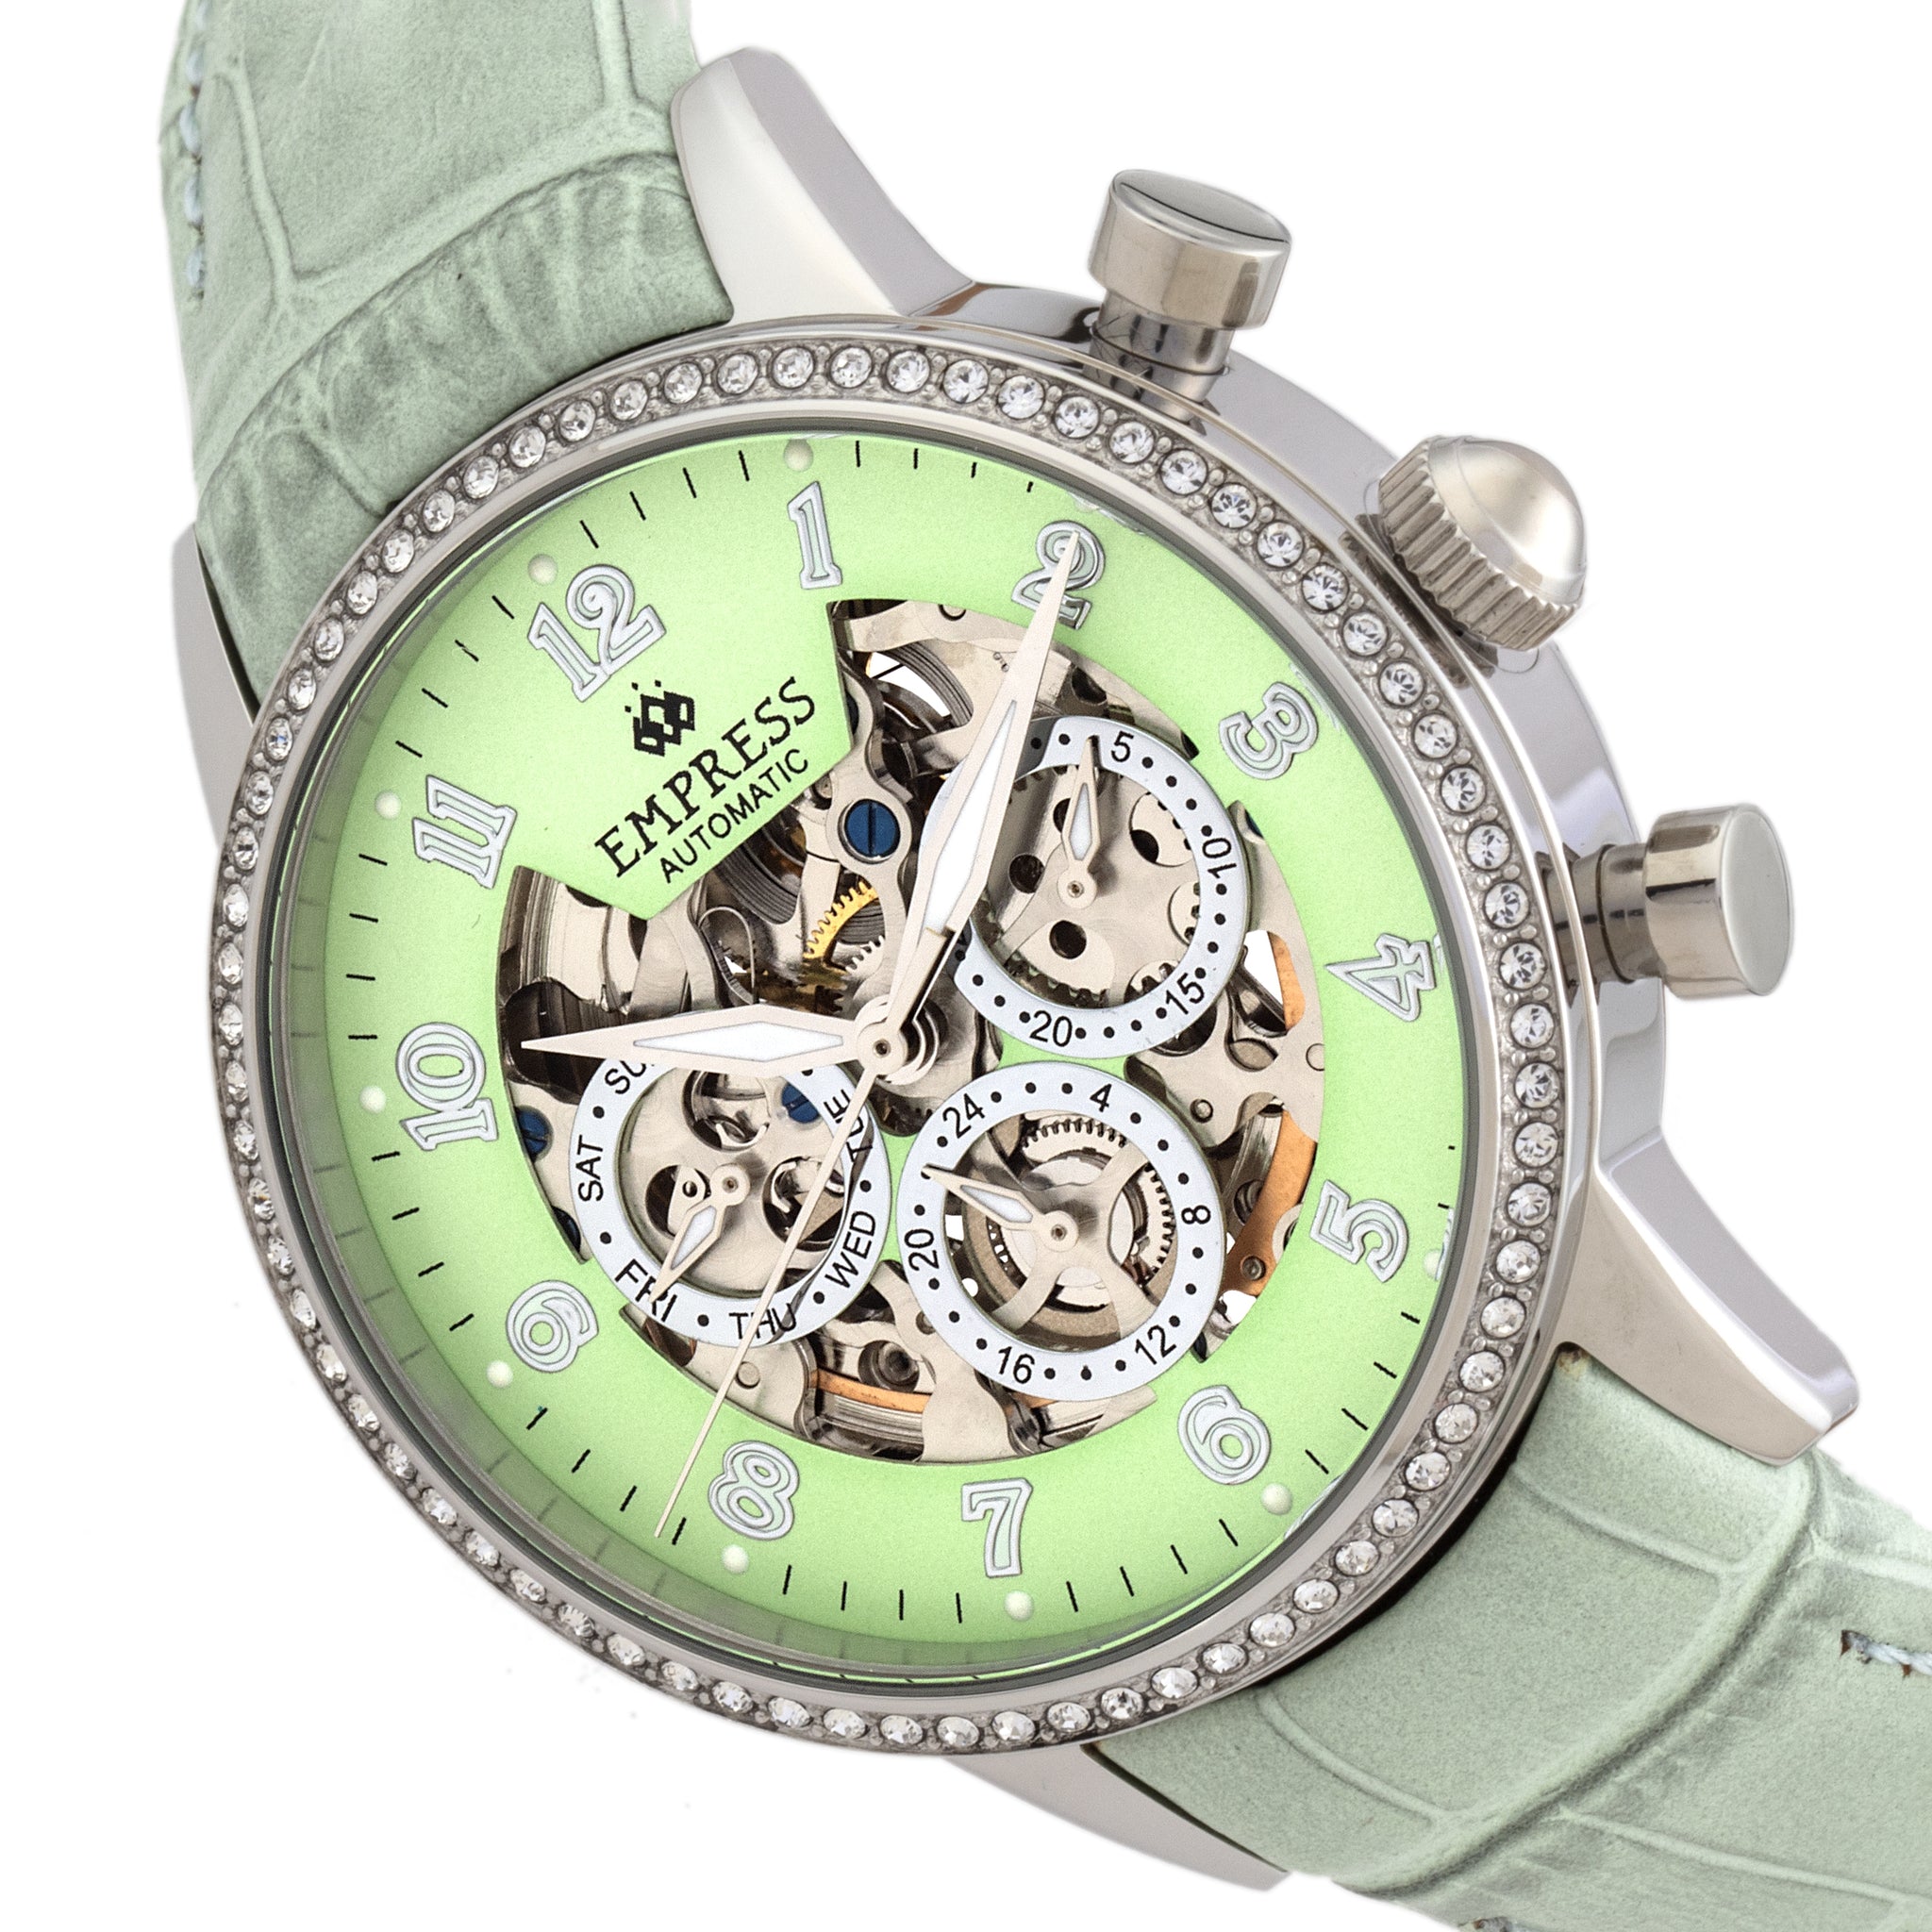 Empress Beatrice Automatic Skeleton Dial Leather-Band Watch w/Day/Date - Silver/Mint - EMPEM2003